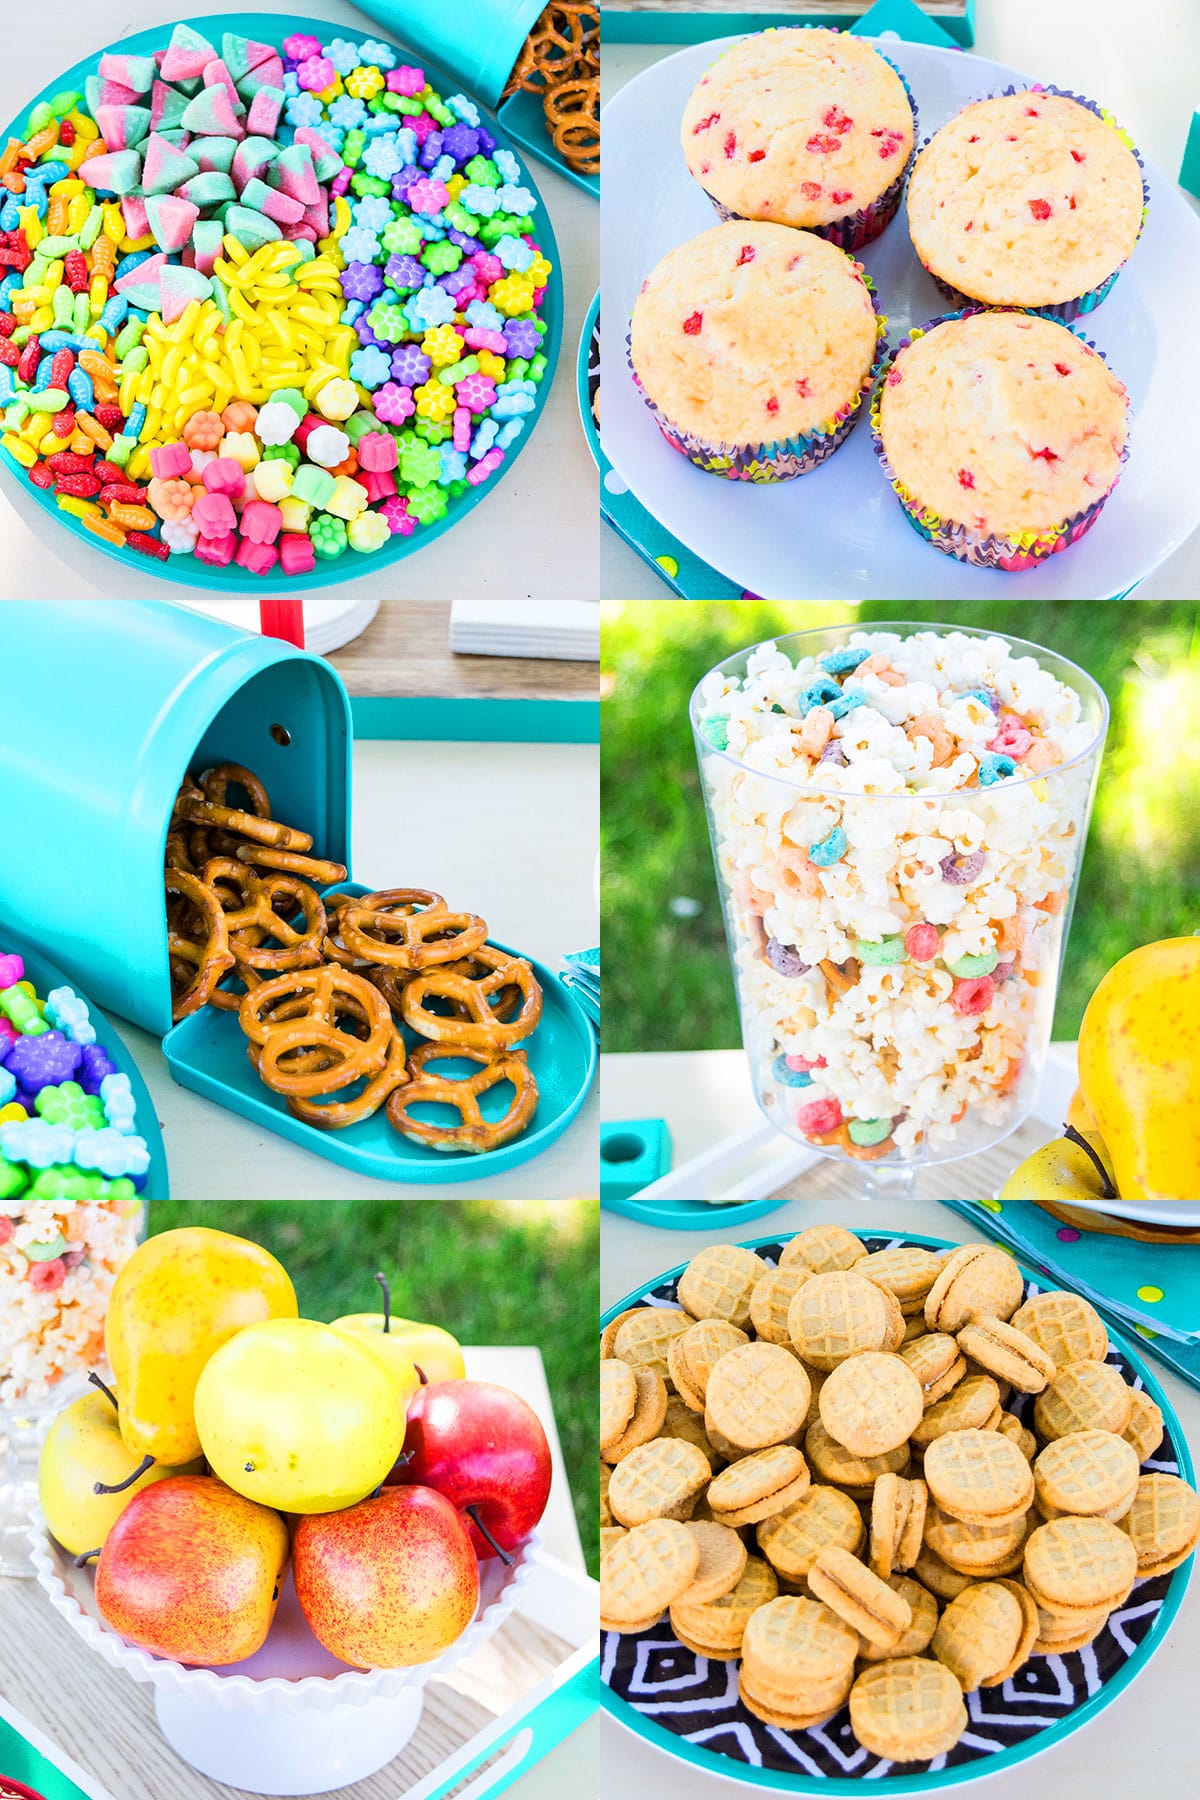 Collage Image With Kids Backyard Summer Party Food and Dessert Table. 